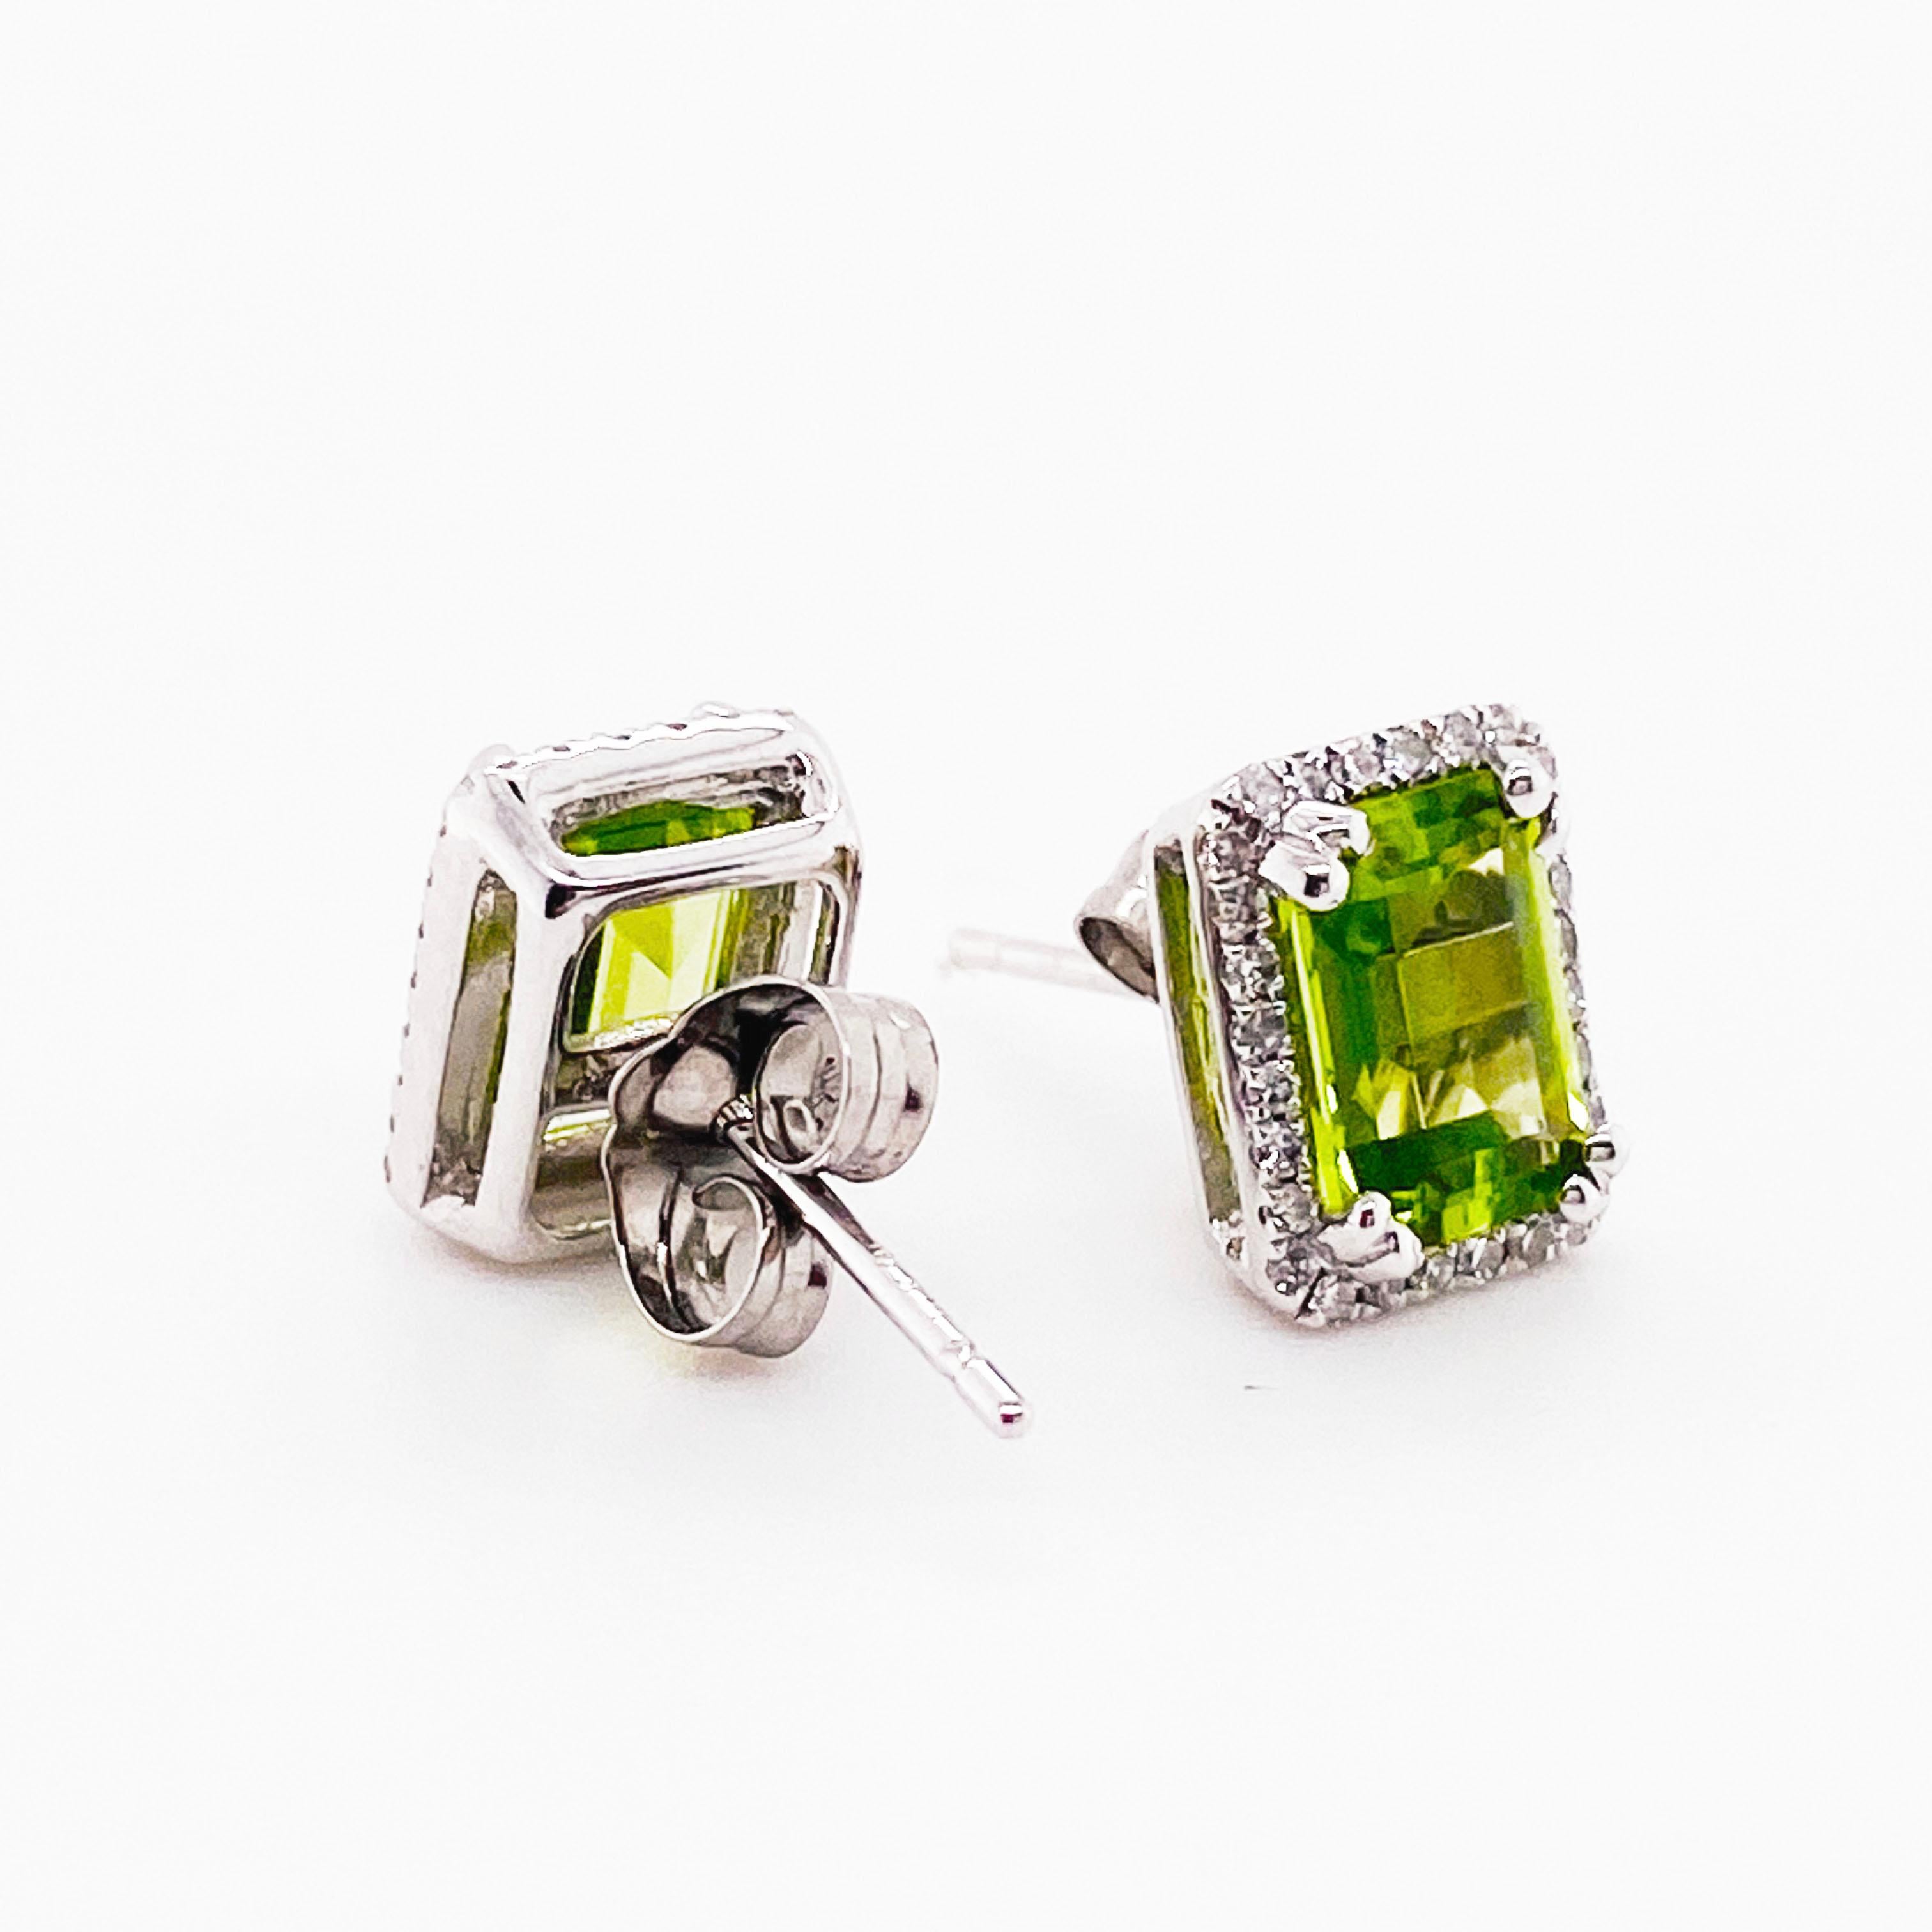 The Genuine Peridot Earrings are constructed in 14 karat white gold and have a halo of diamonds around an emerald cut peridot in each earring.  There are a total of 2.02 carats of peridot and .20 carats of diamonds!  There are a total of 56 diamonds